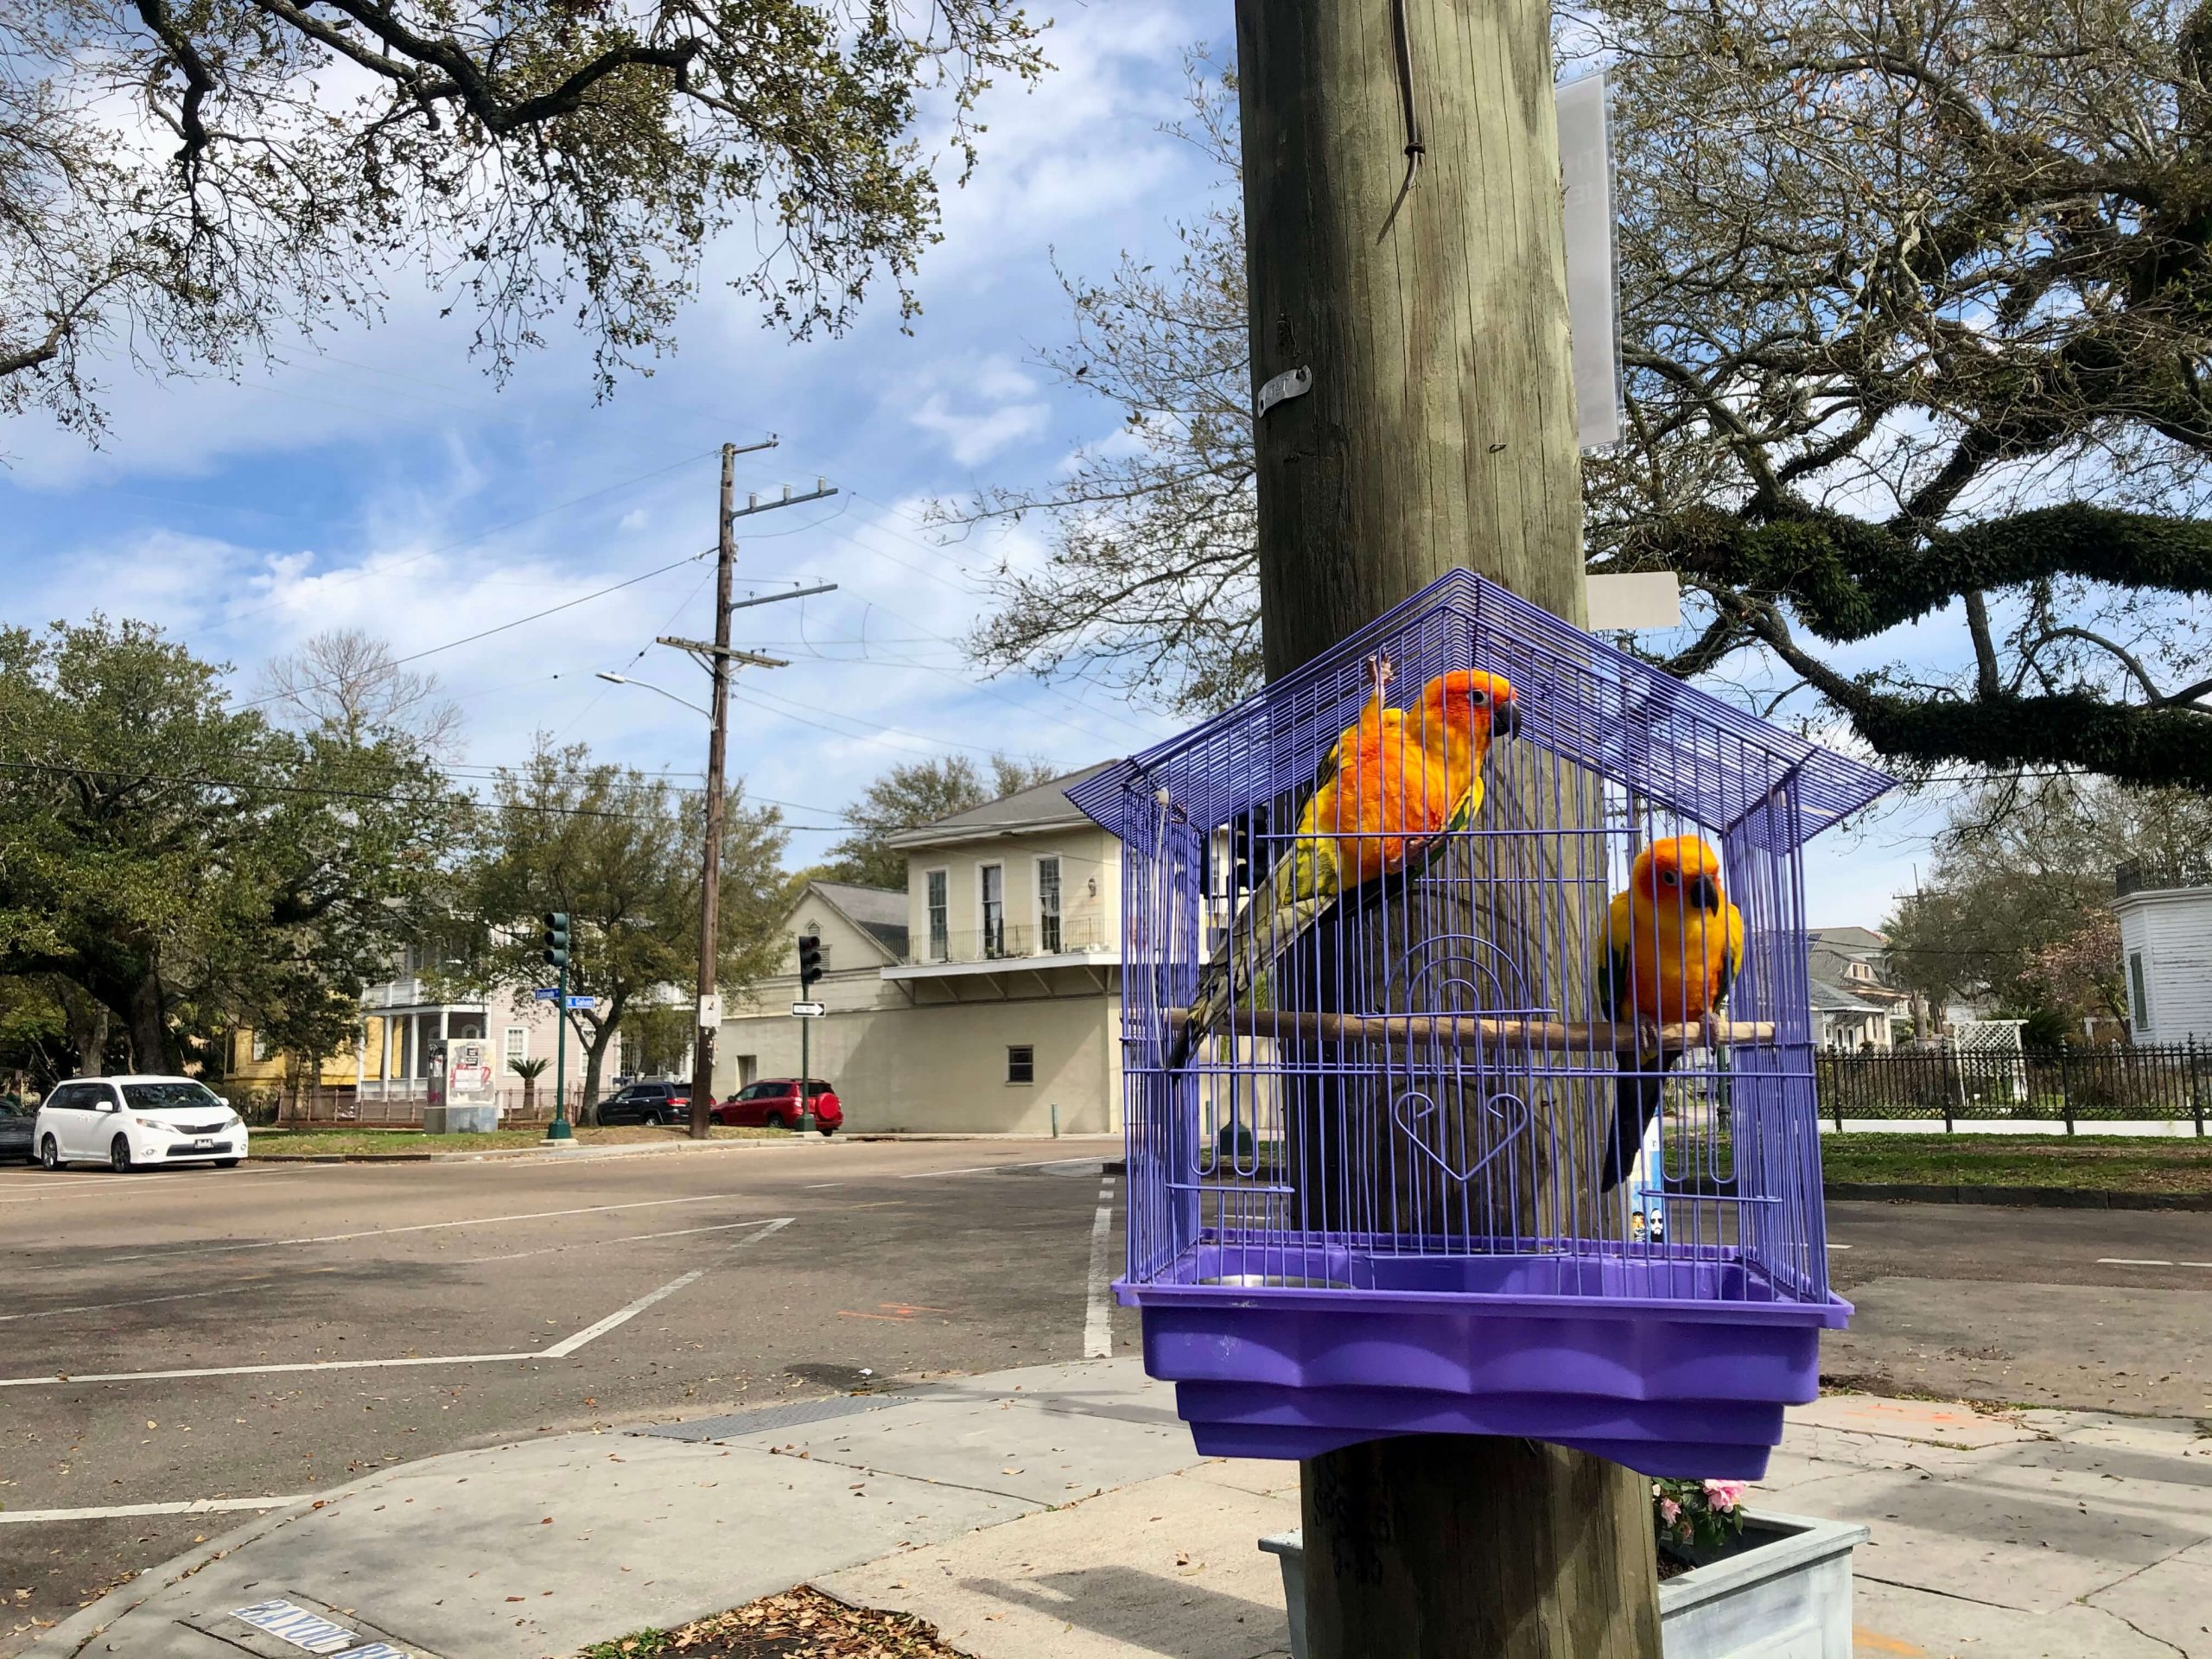 Parrots in New Orleans